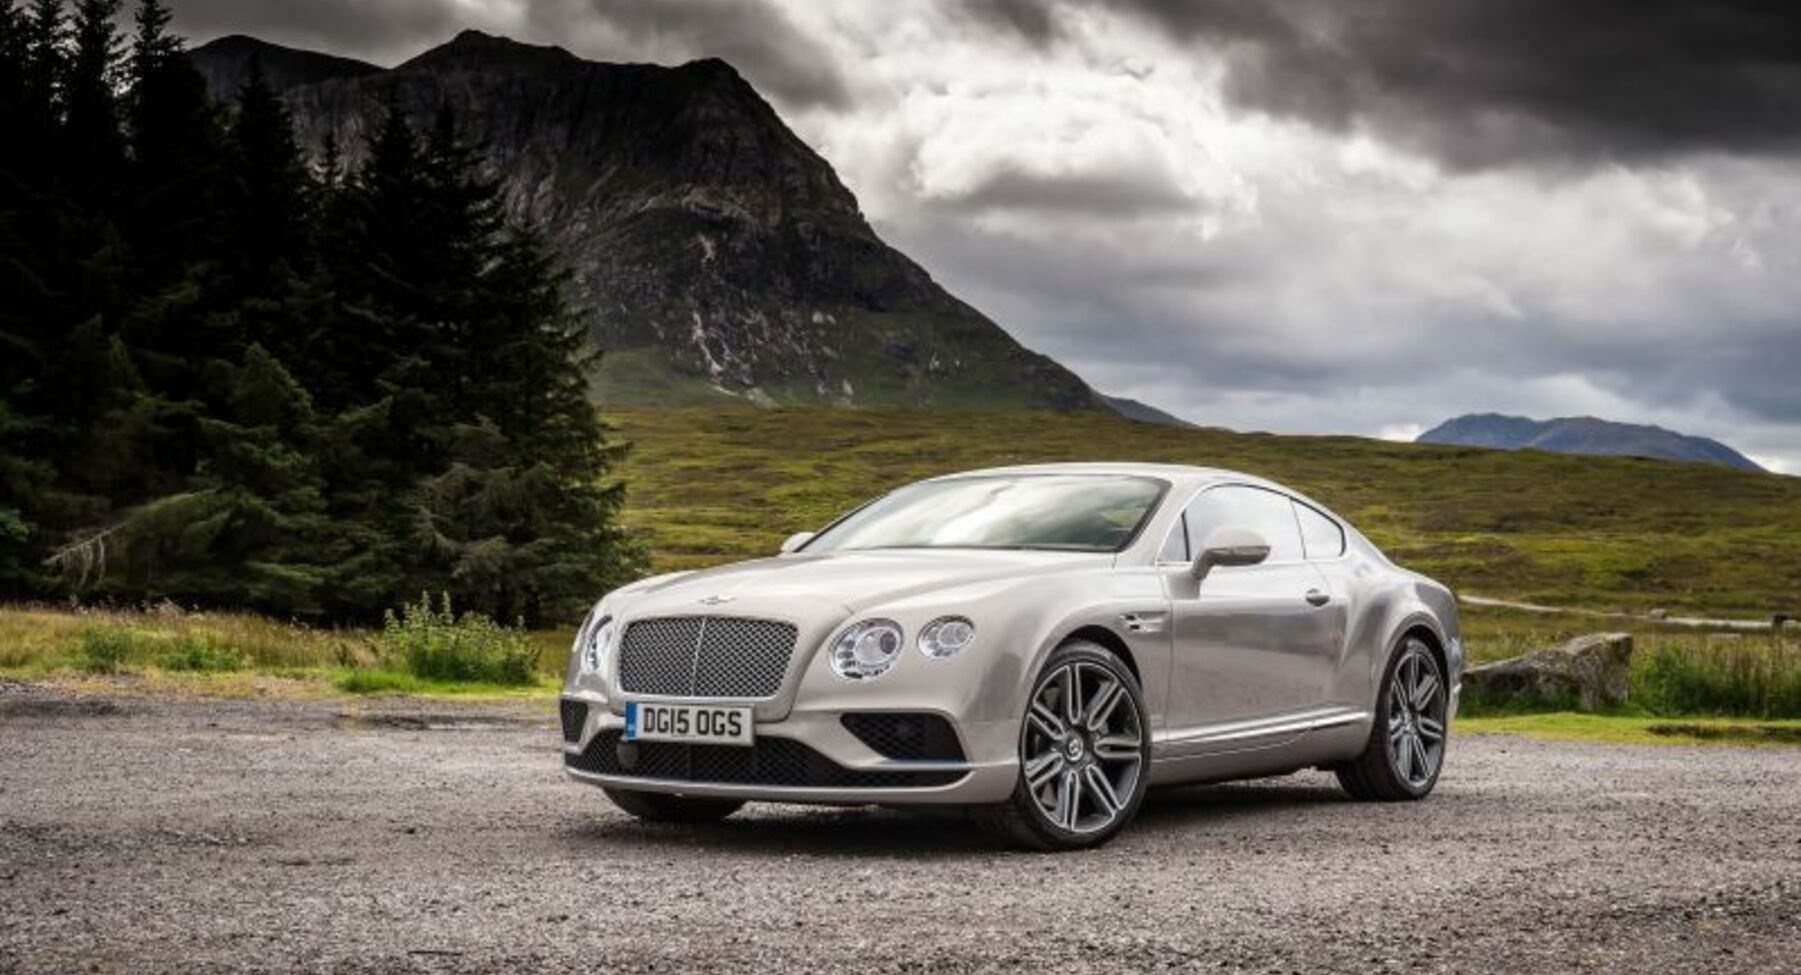 Bentley Continental GT II (facelift 2015) GT3-R 4.0 (580 Hp) AWD Automatic 2015, 2016, 2017, 2018 